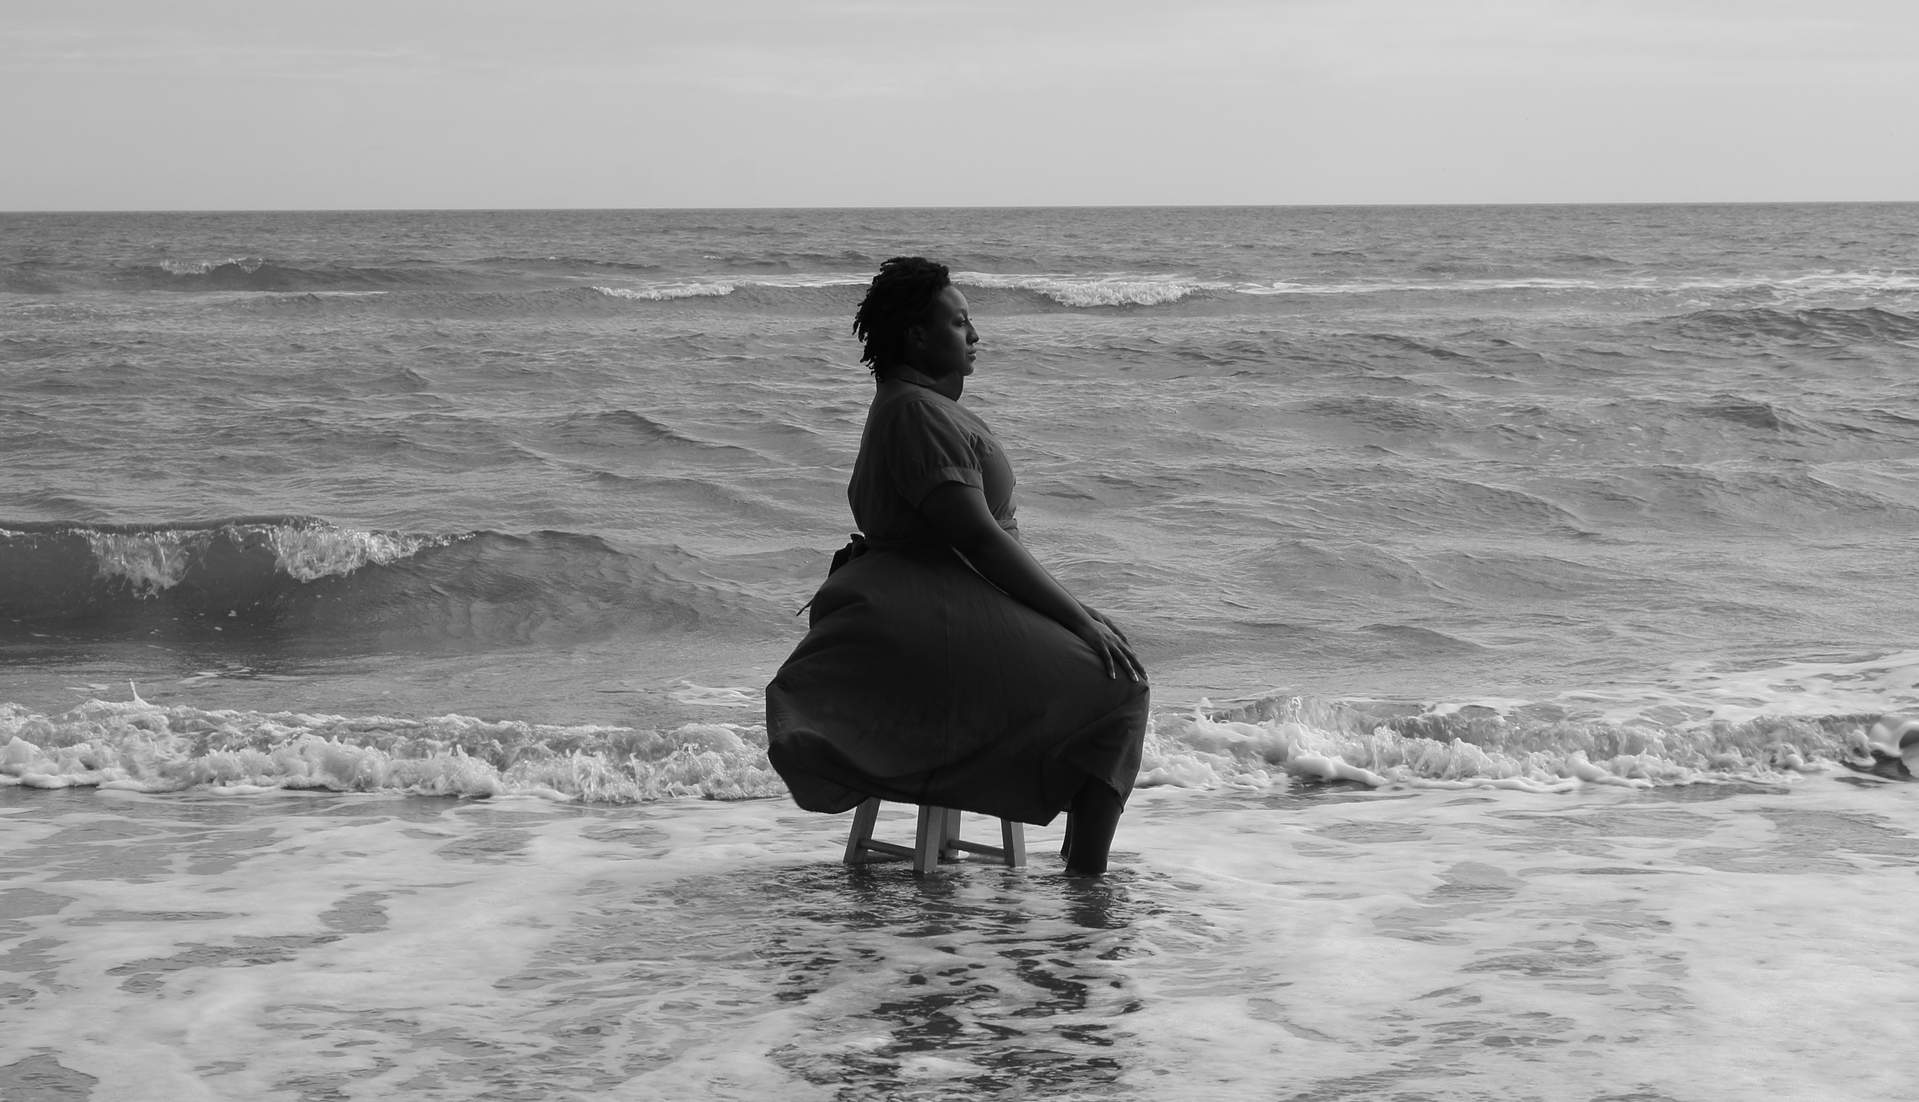 Black and white photograph of a woman sitting on a chair in the waves of a beach.